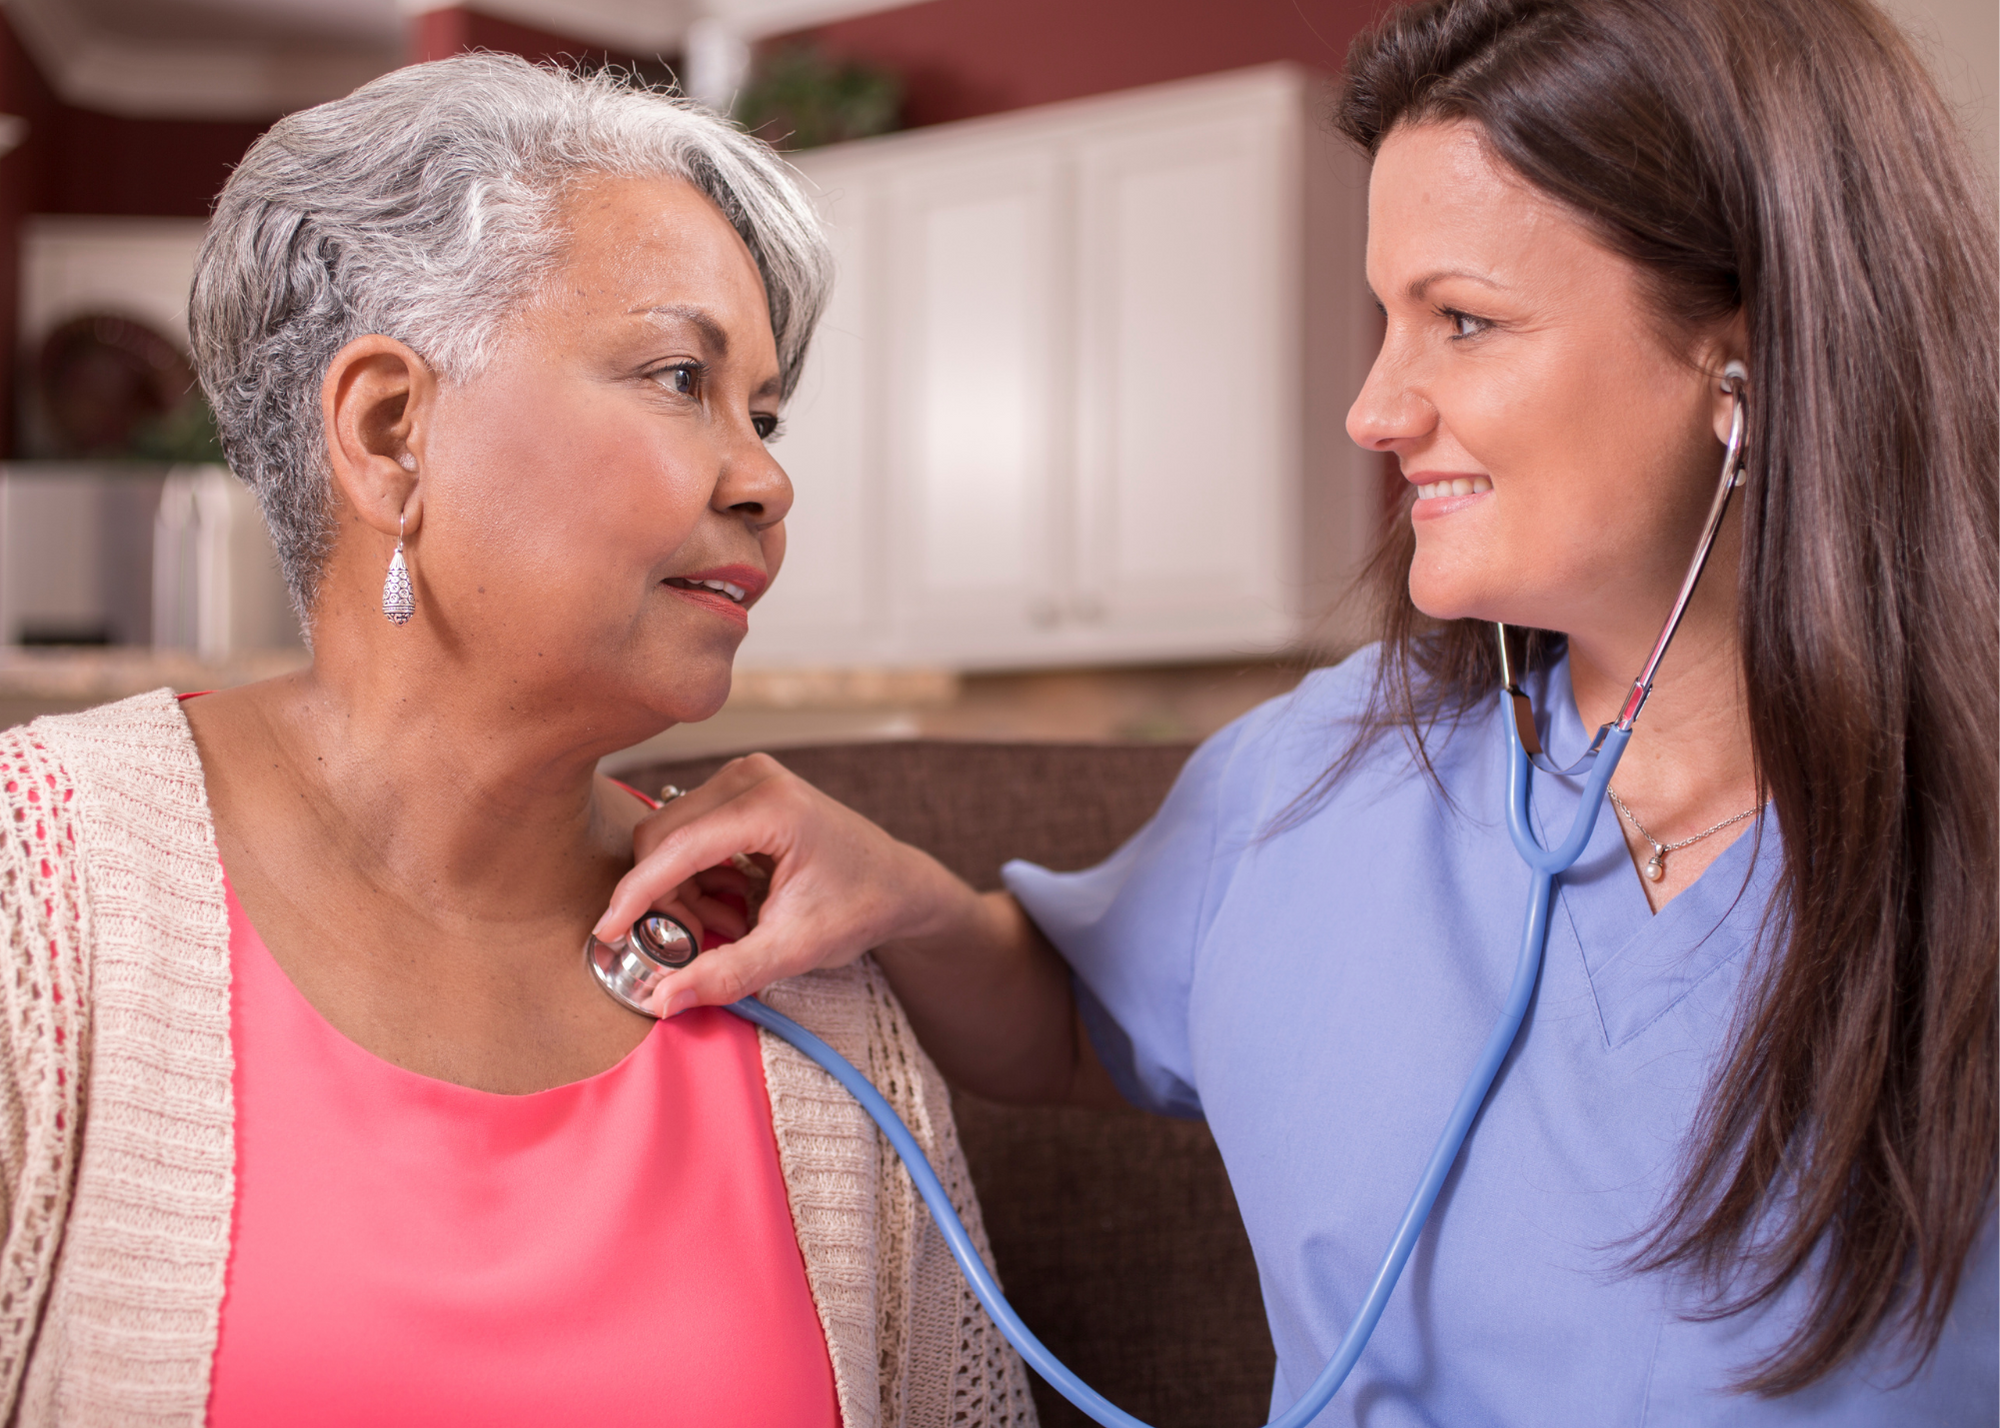 Stock photo of a smiling female health care provider uses a stethescope on a smiling elderly woman